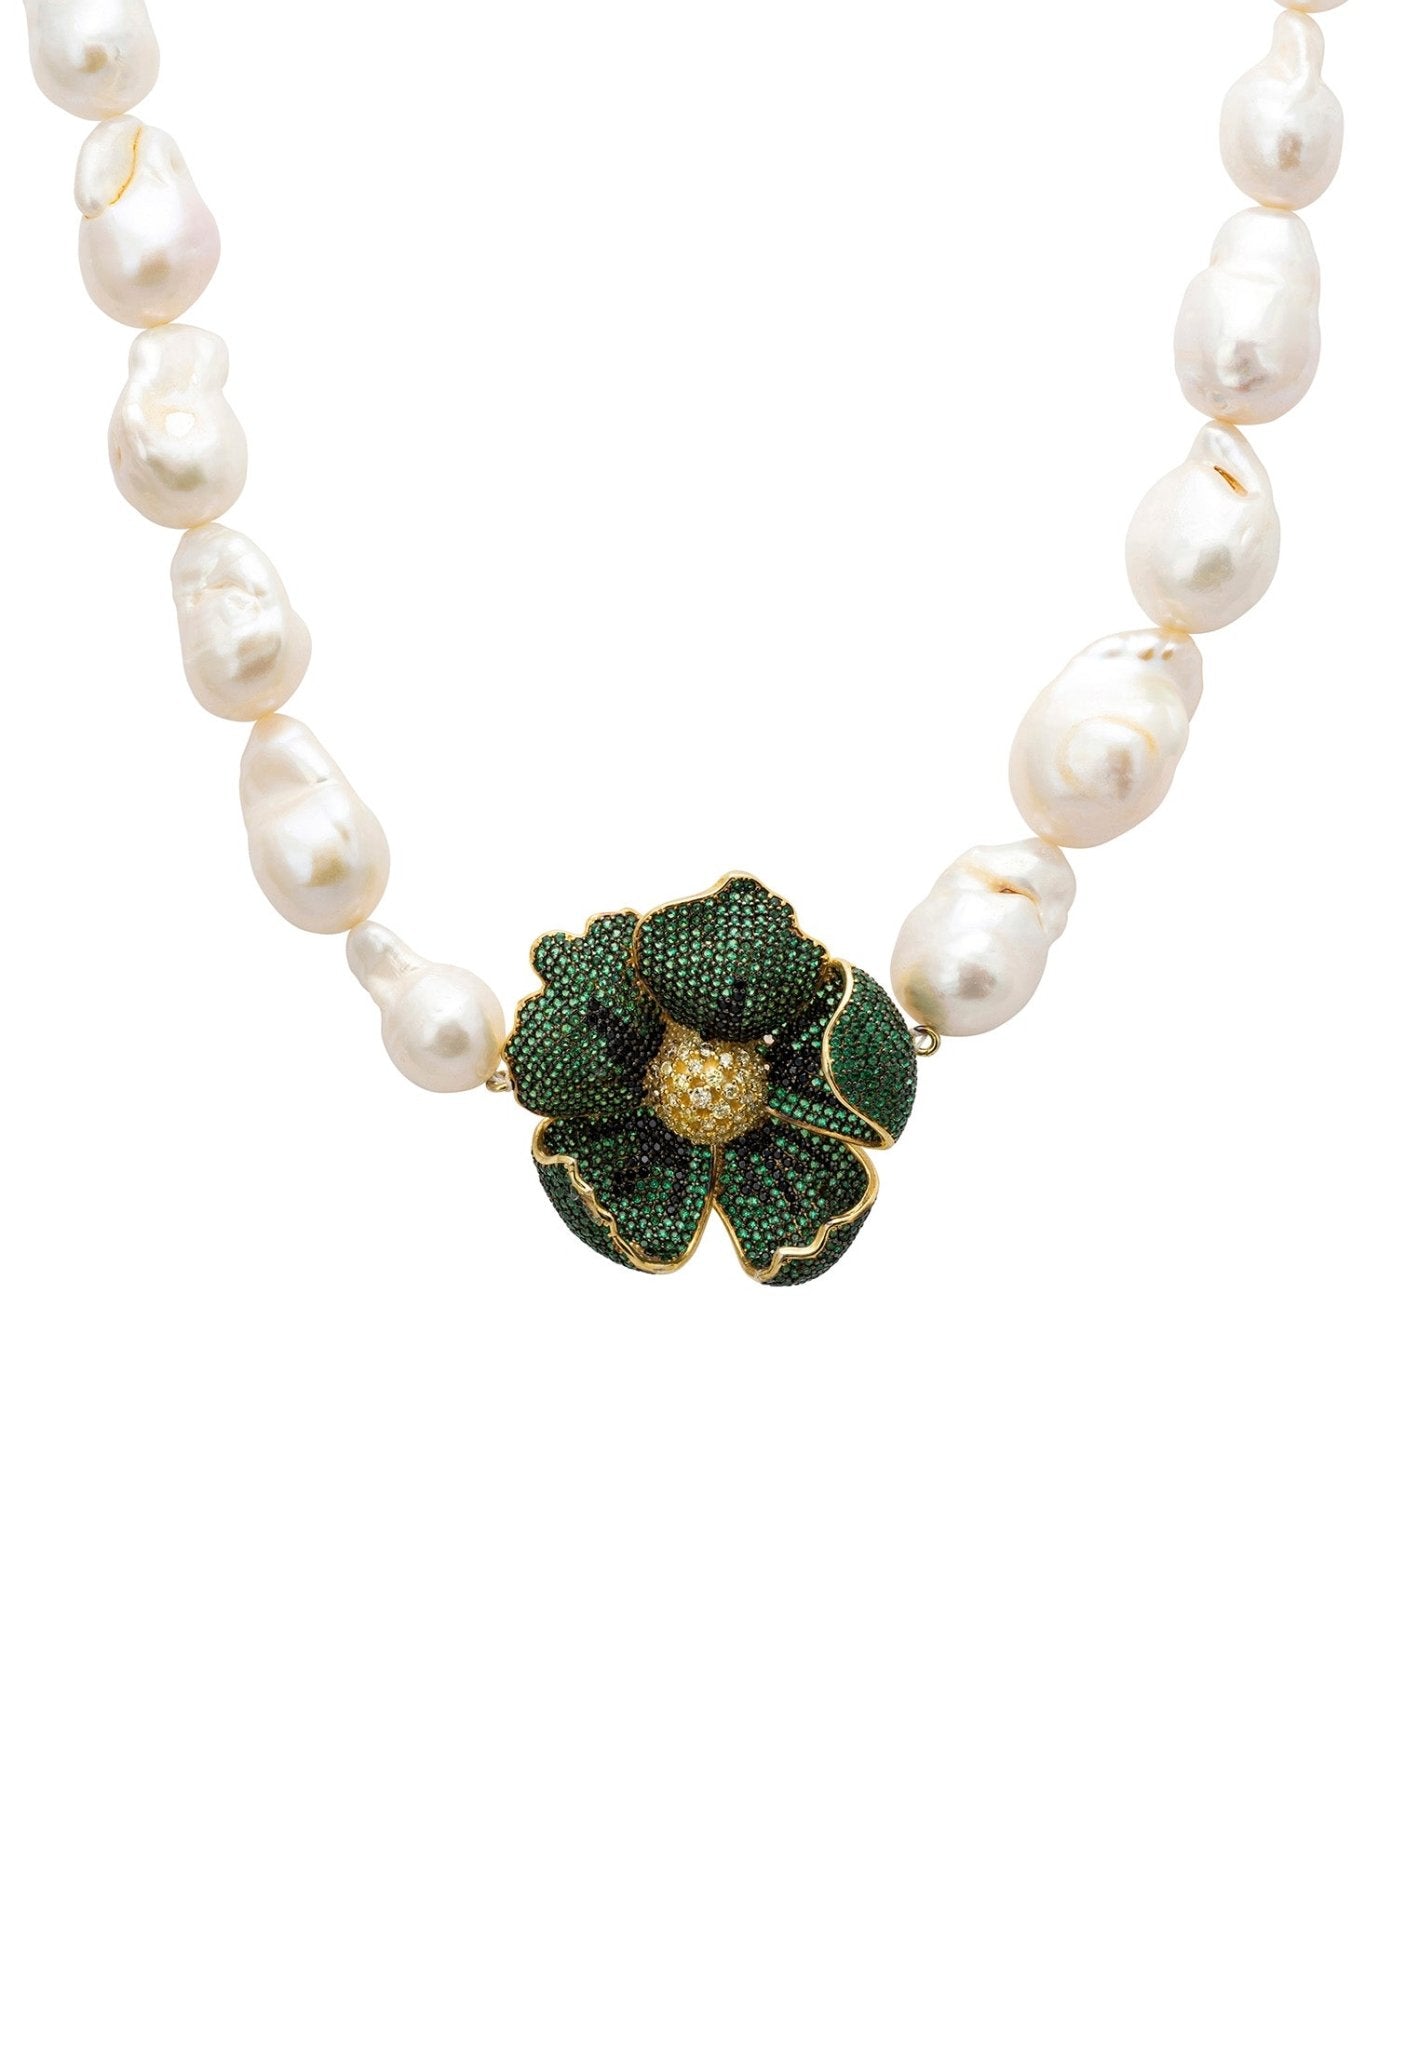 Poppy Flower Baroque Pearl Necklace Emerald Green Gold - LATELITA Necklaces